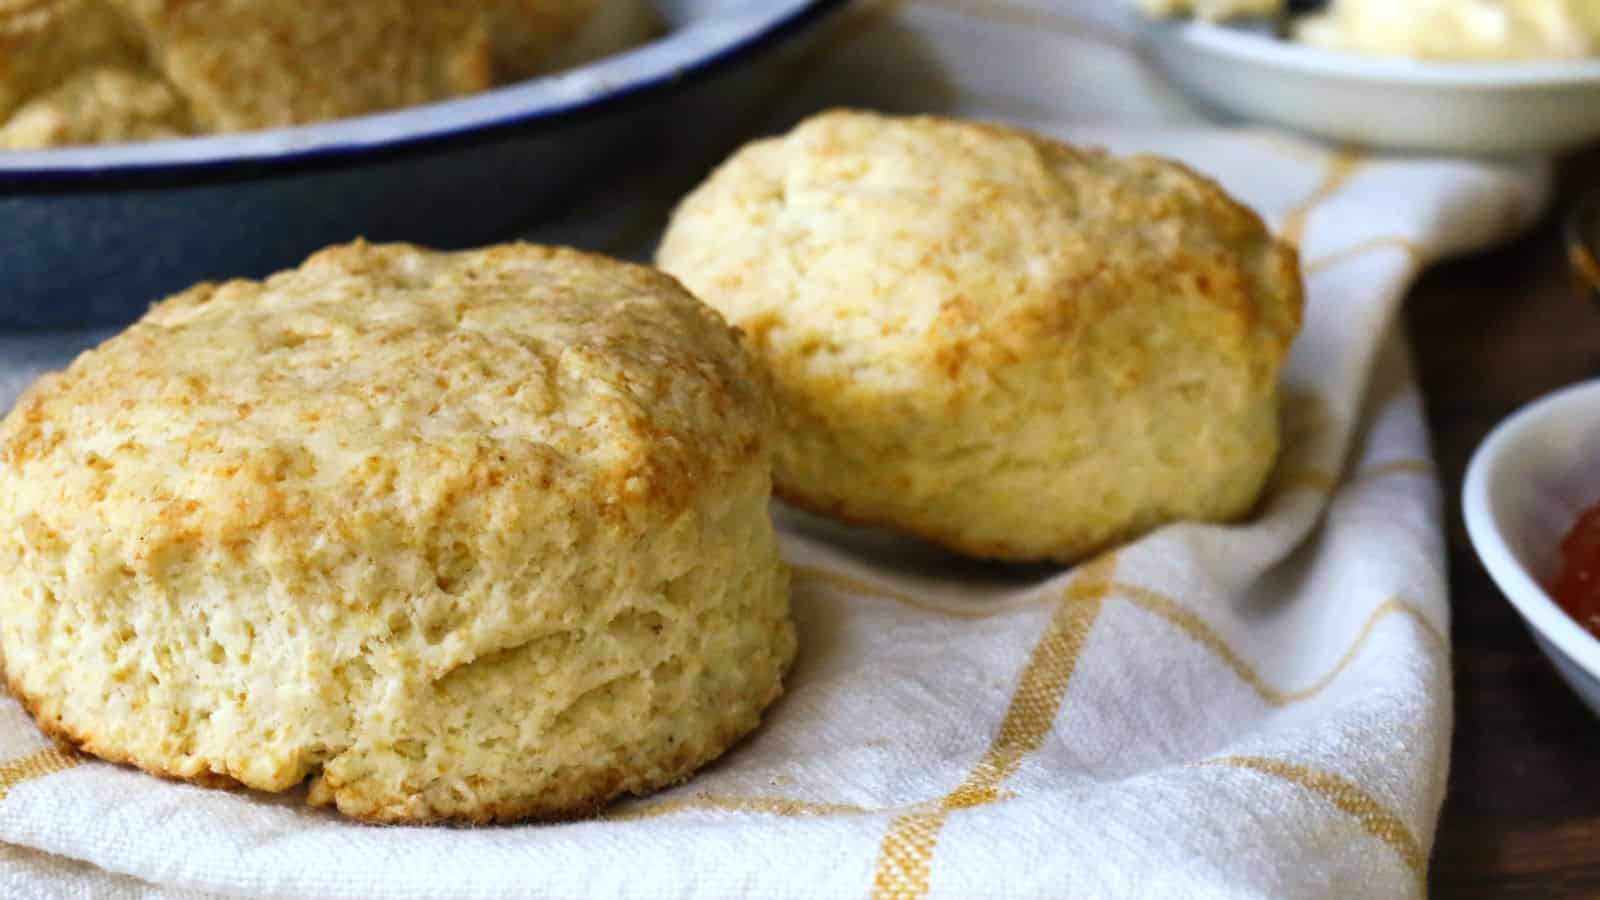 Two baked biscuits on a white and gold towel.